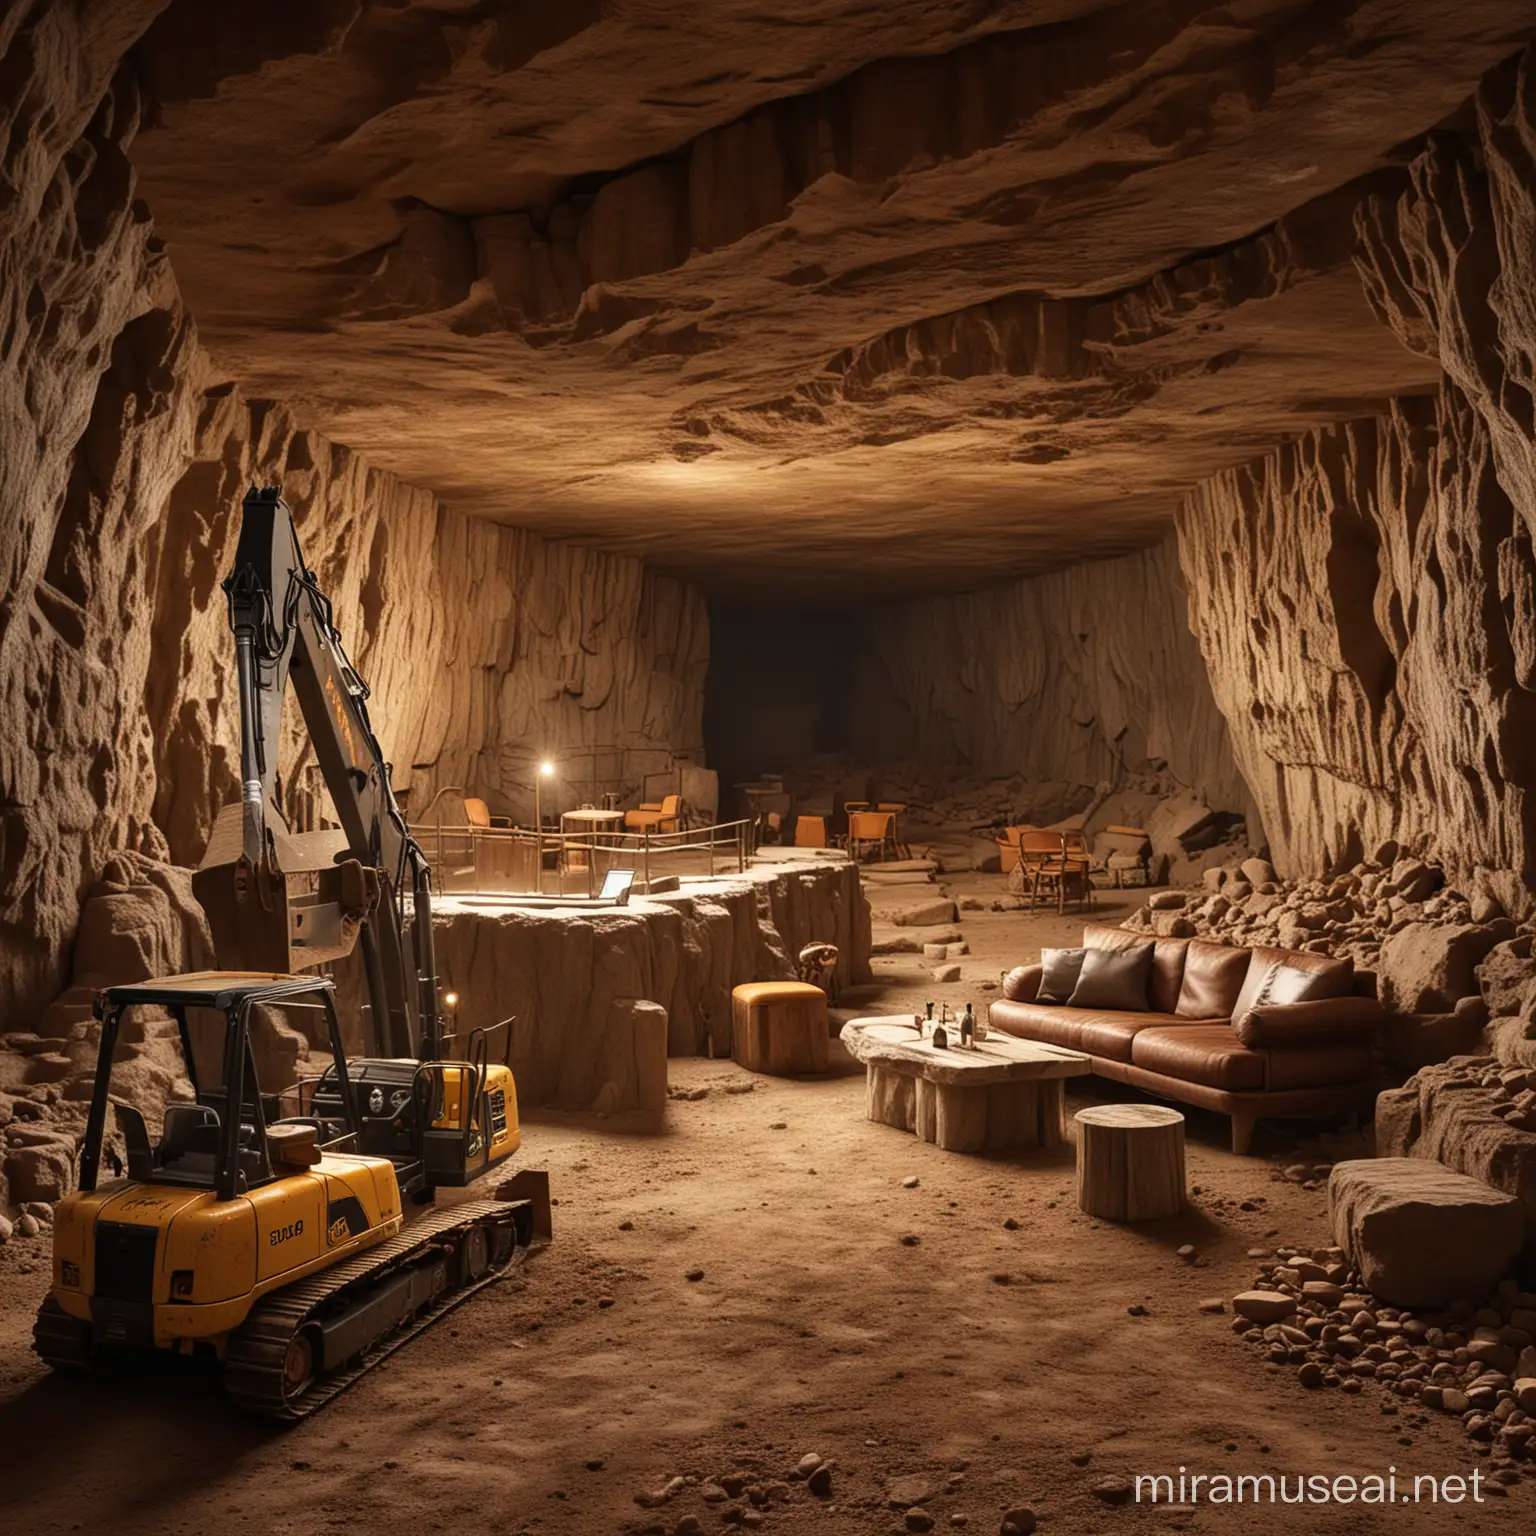 Rustic Cigar Lounge Carved into Cliffside Cave by Mini Excavator